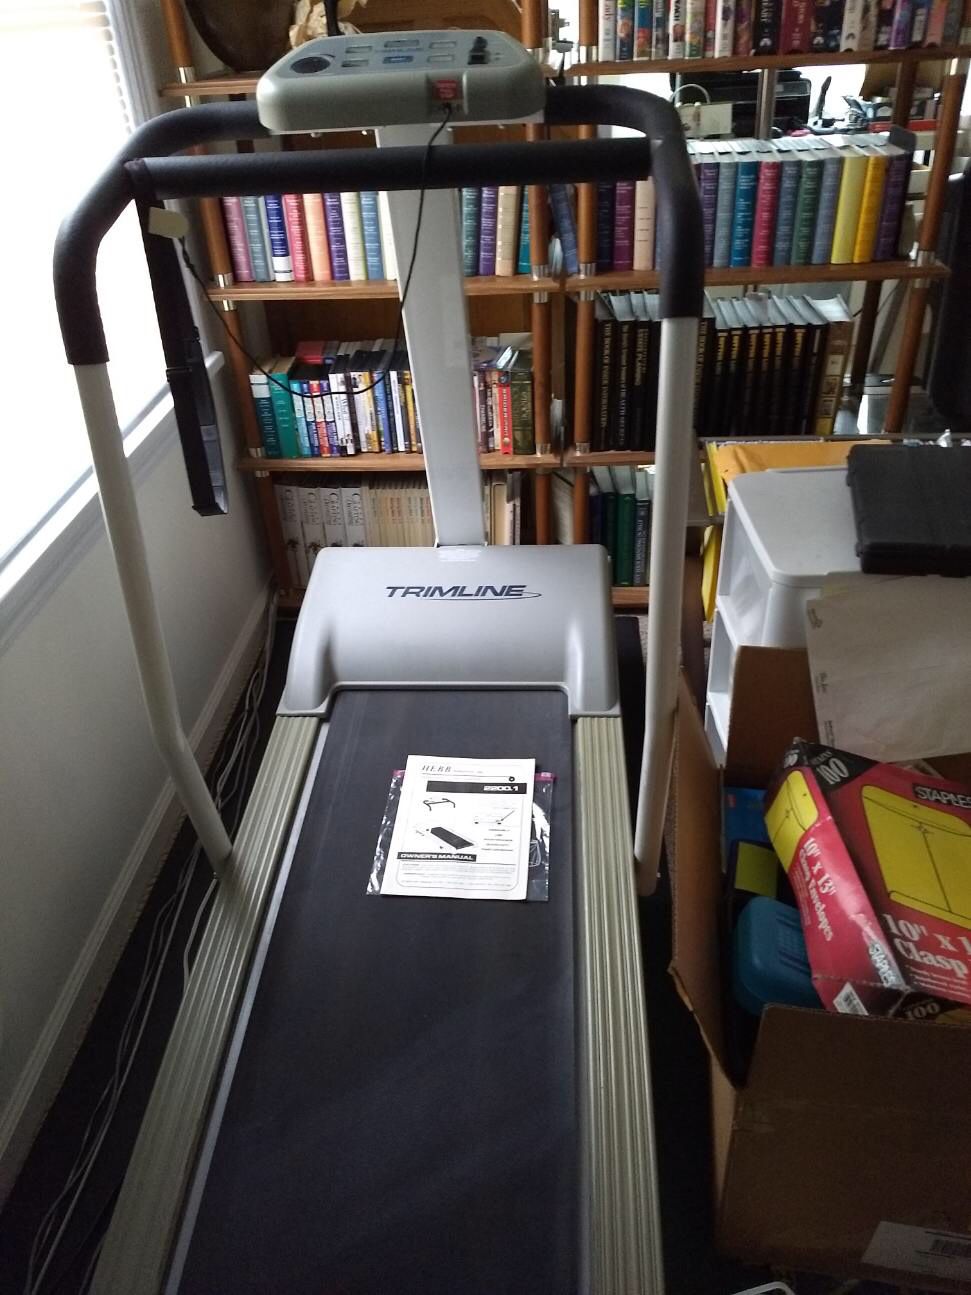 ON SALE!!! Trimline 2200.1 electric treadmill for Sale in Rochester, NY ...